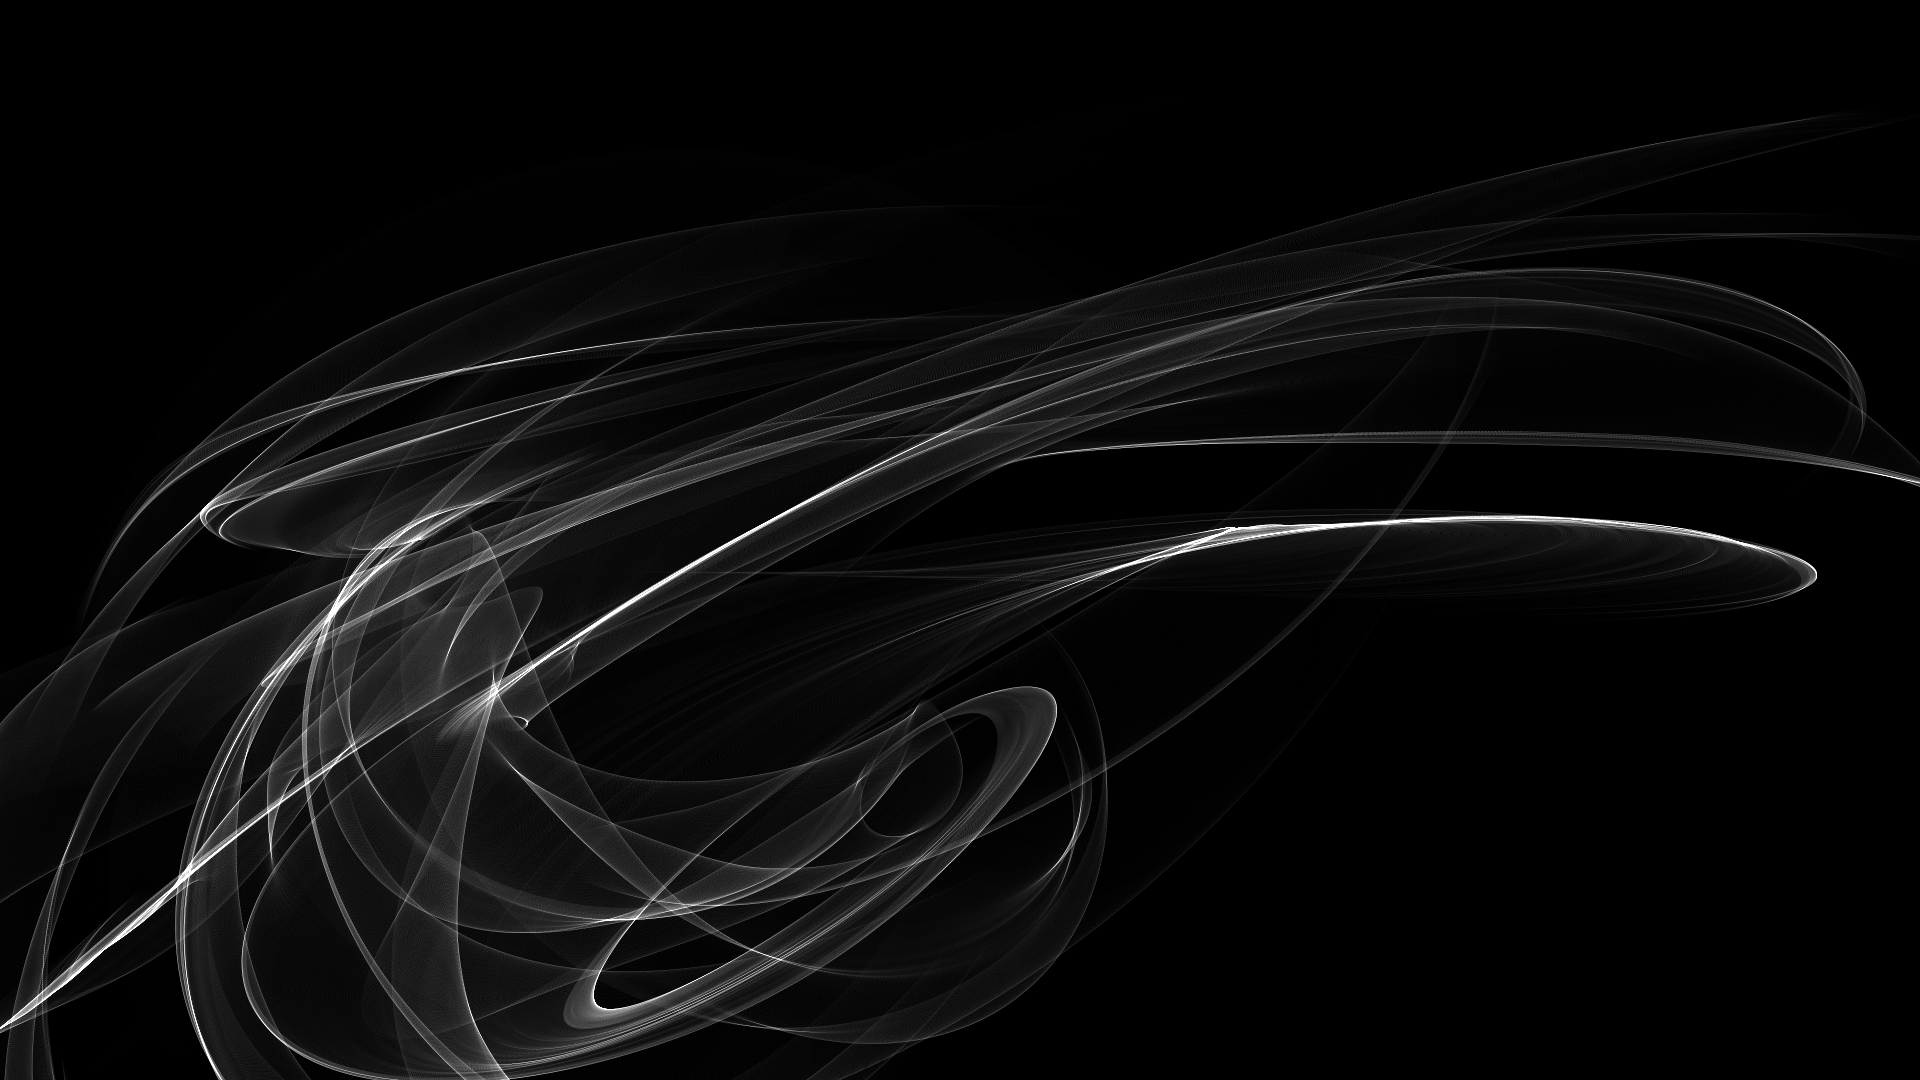 Abstract Dark Wallpapers